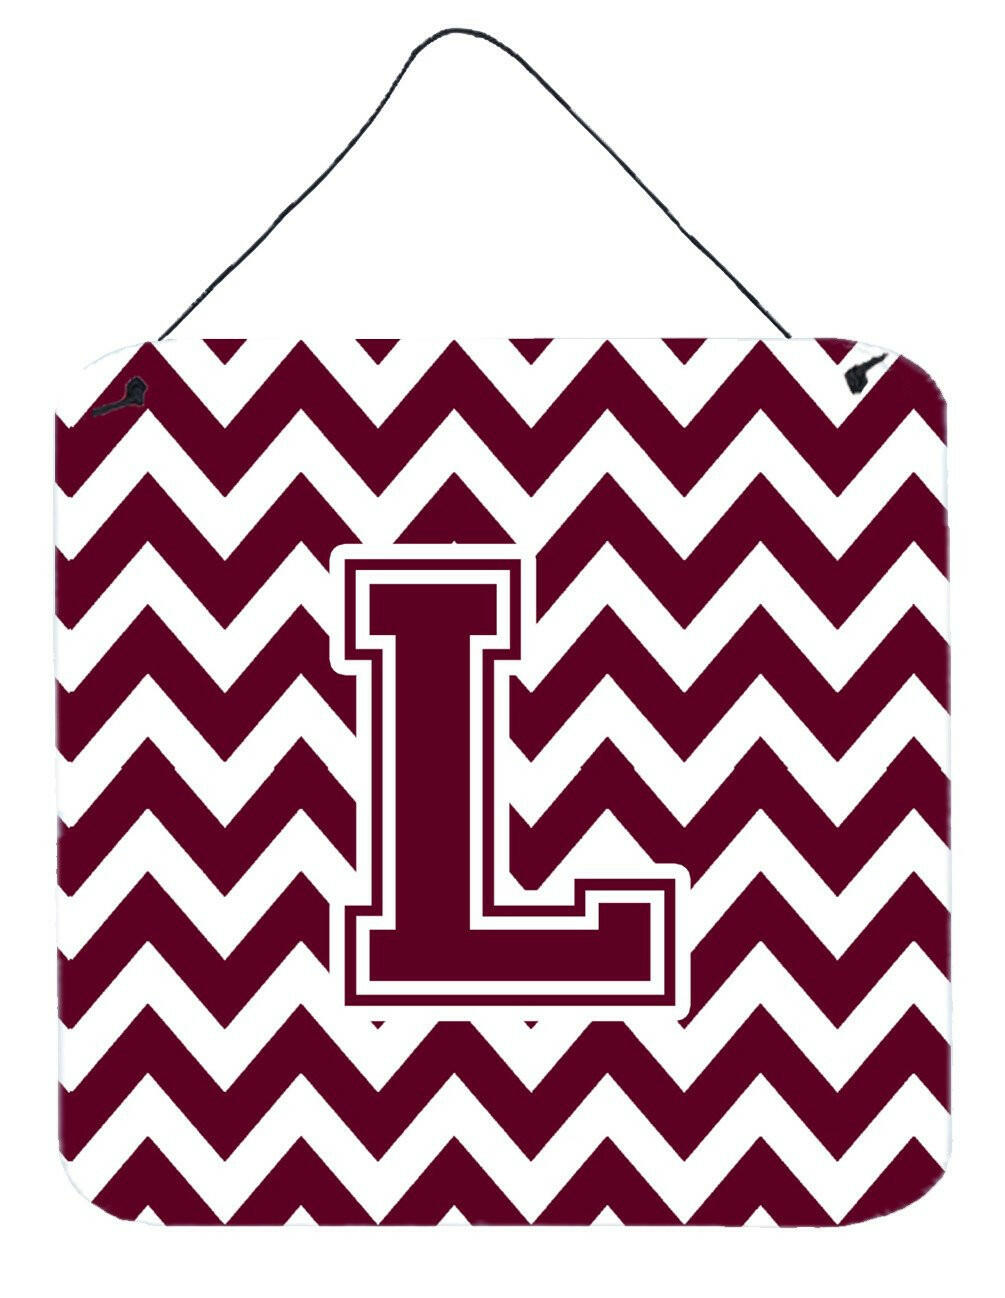 Letter L Chevron Maroon and White  Wall or Door Hanging Prints CJ1051-LDS66 by Caroline's Treasures